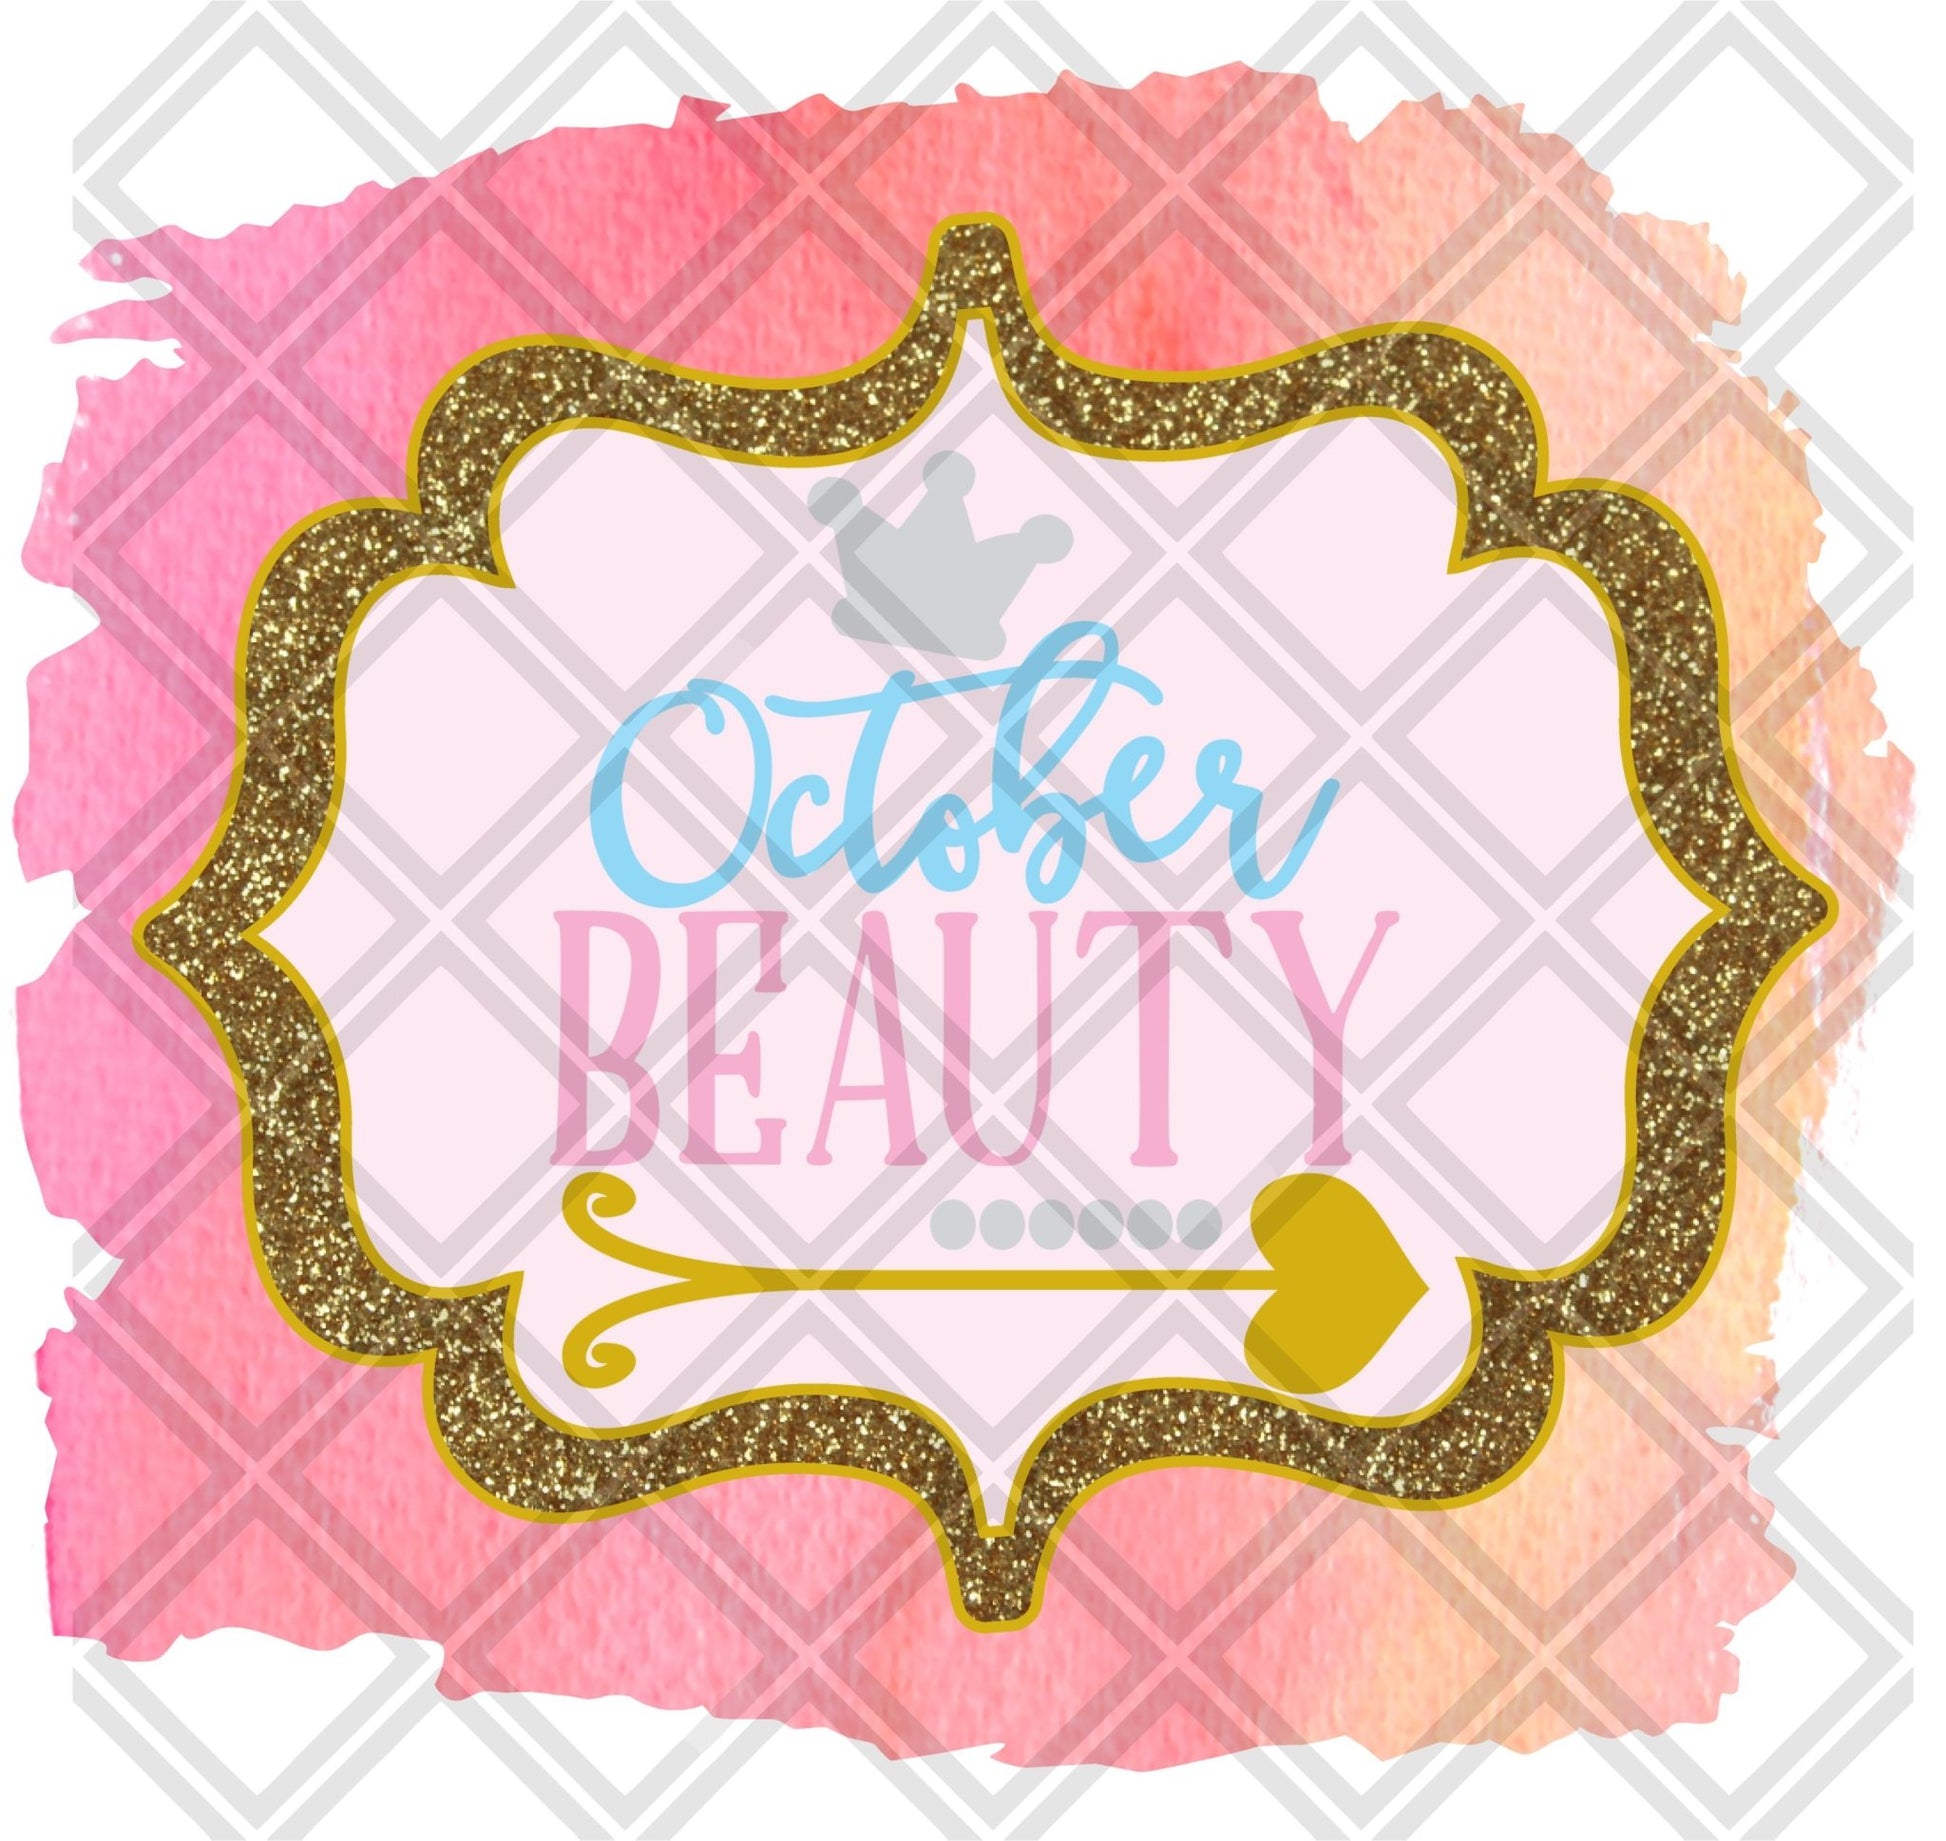 OCTOBER BEAUTY MONTH png Digital Download Instand Download - Do it yourself Transfers